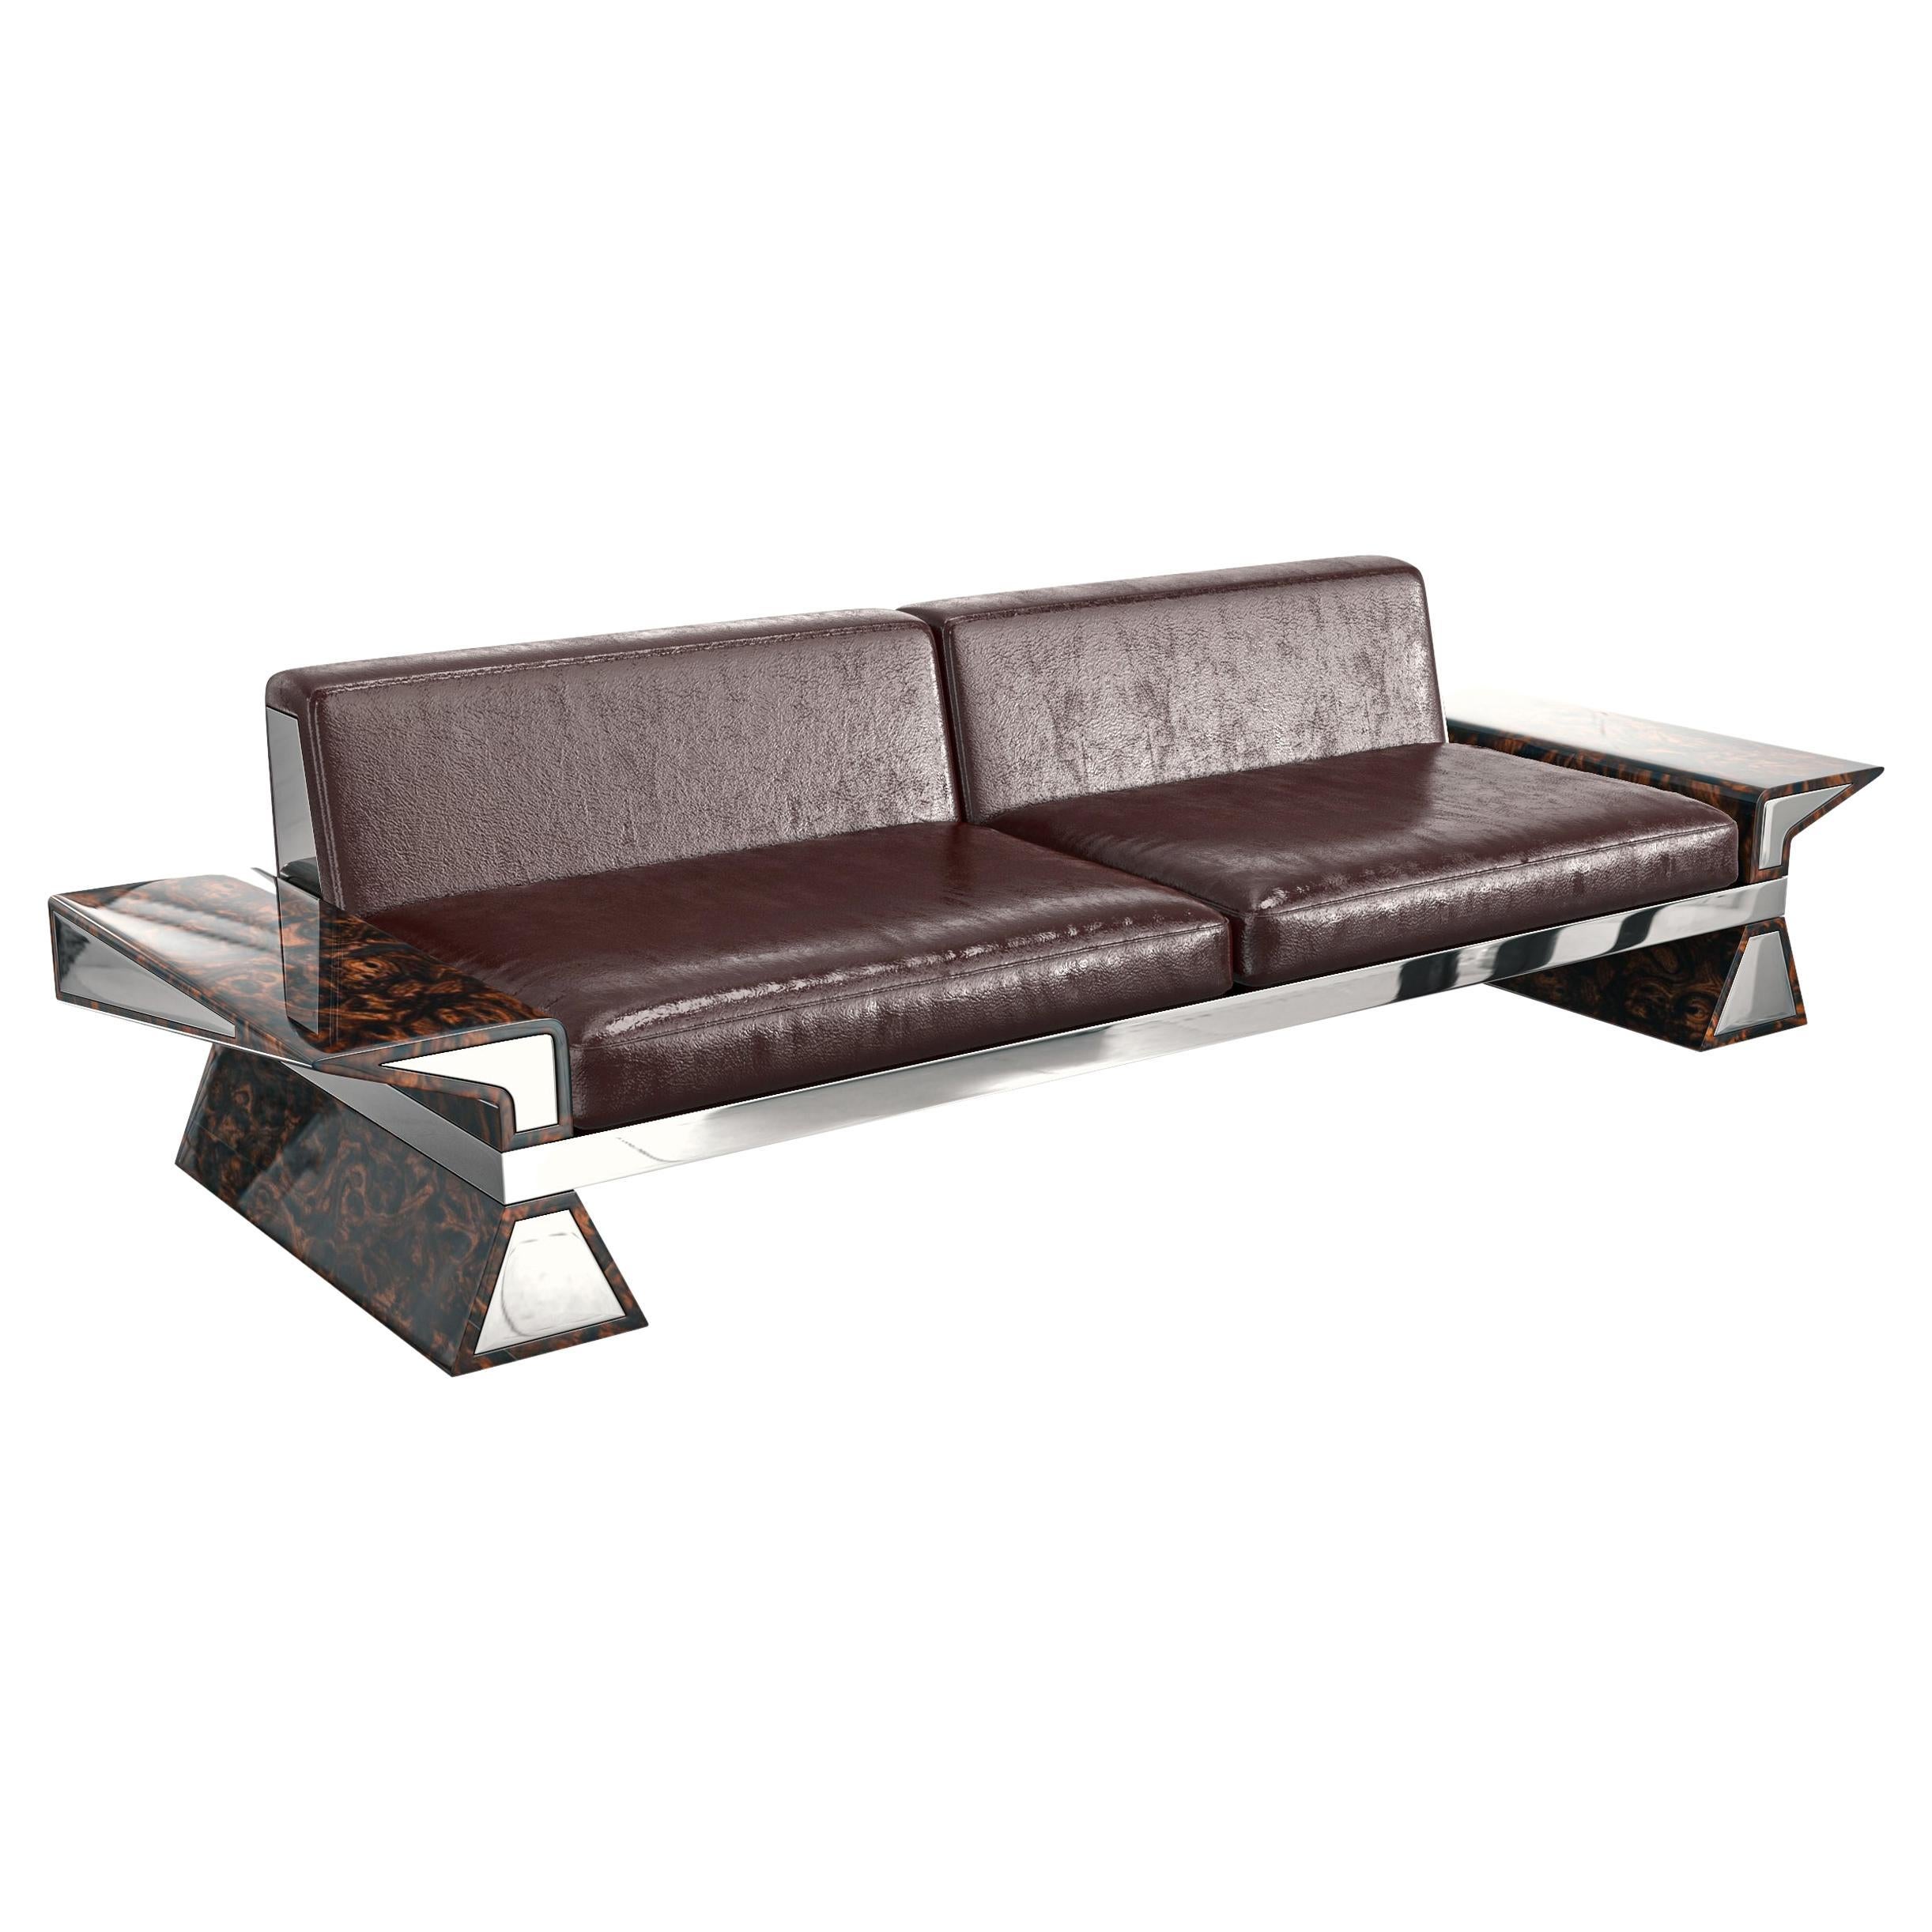 La Ciliegia" Sofa with Stainless Steel, Burl Walnut, Hand Crafted, Istanbul  For Sale at 1stDibs